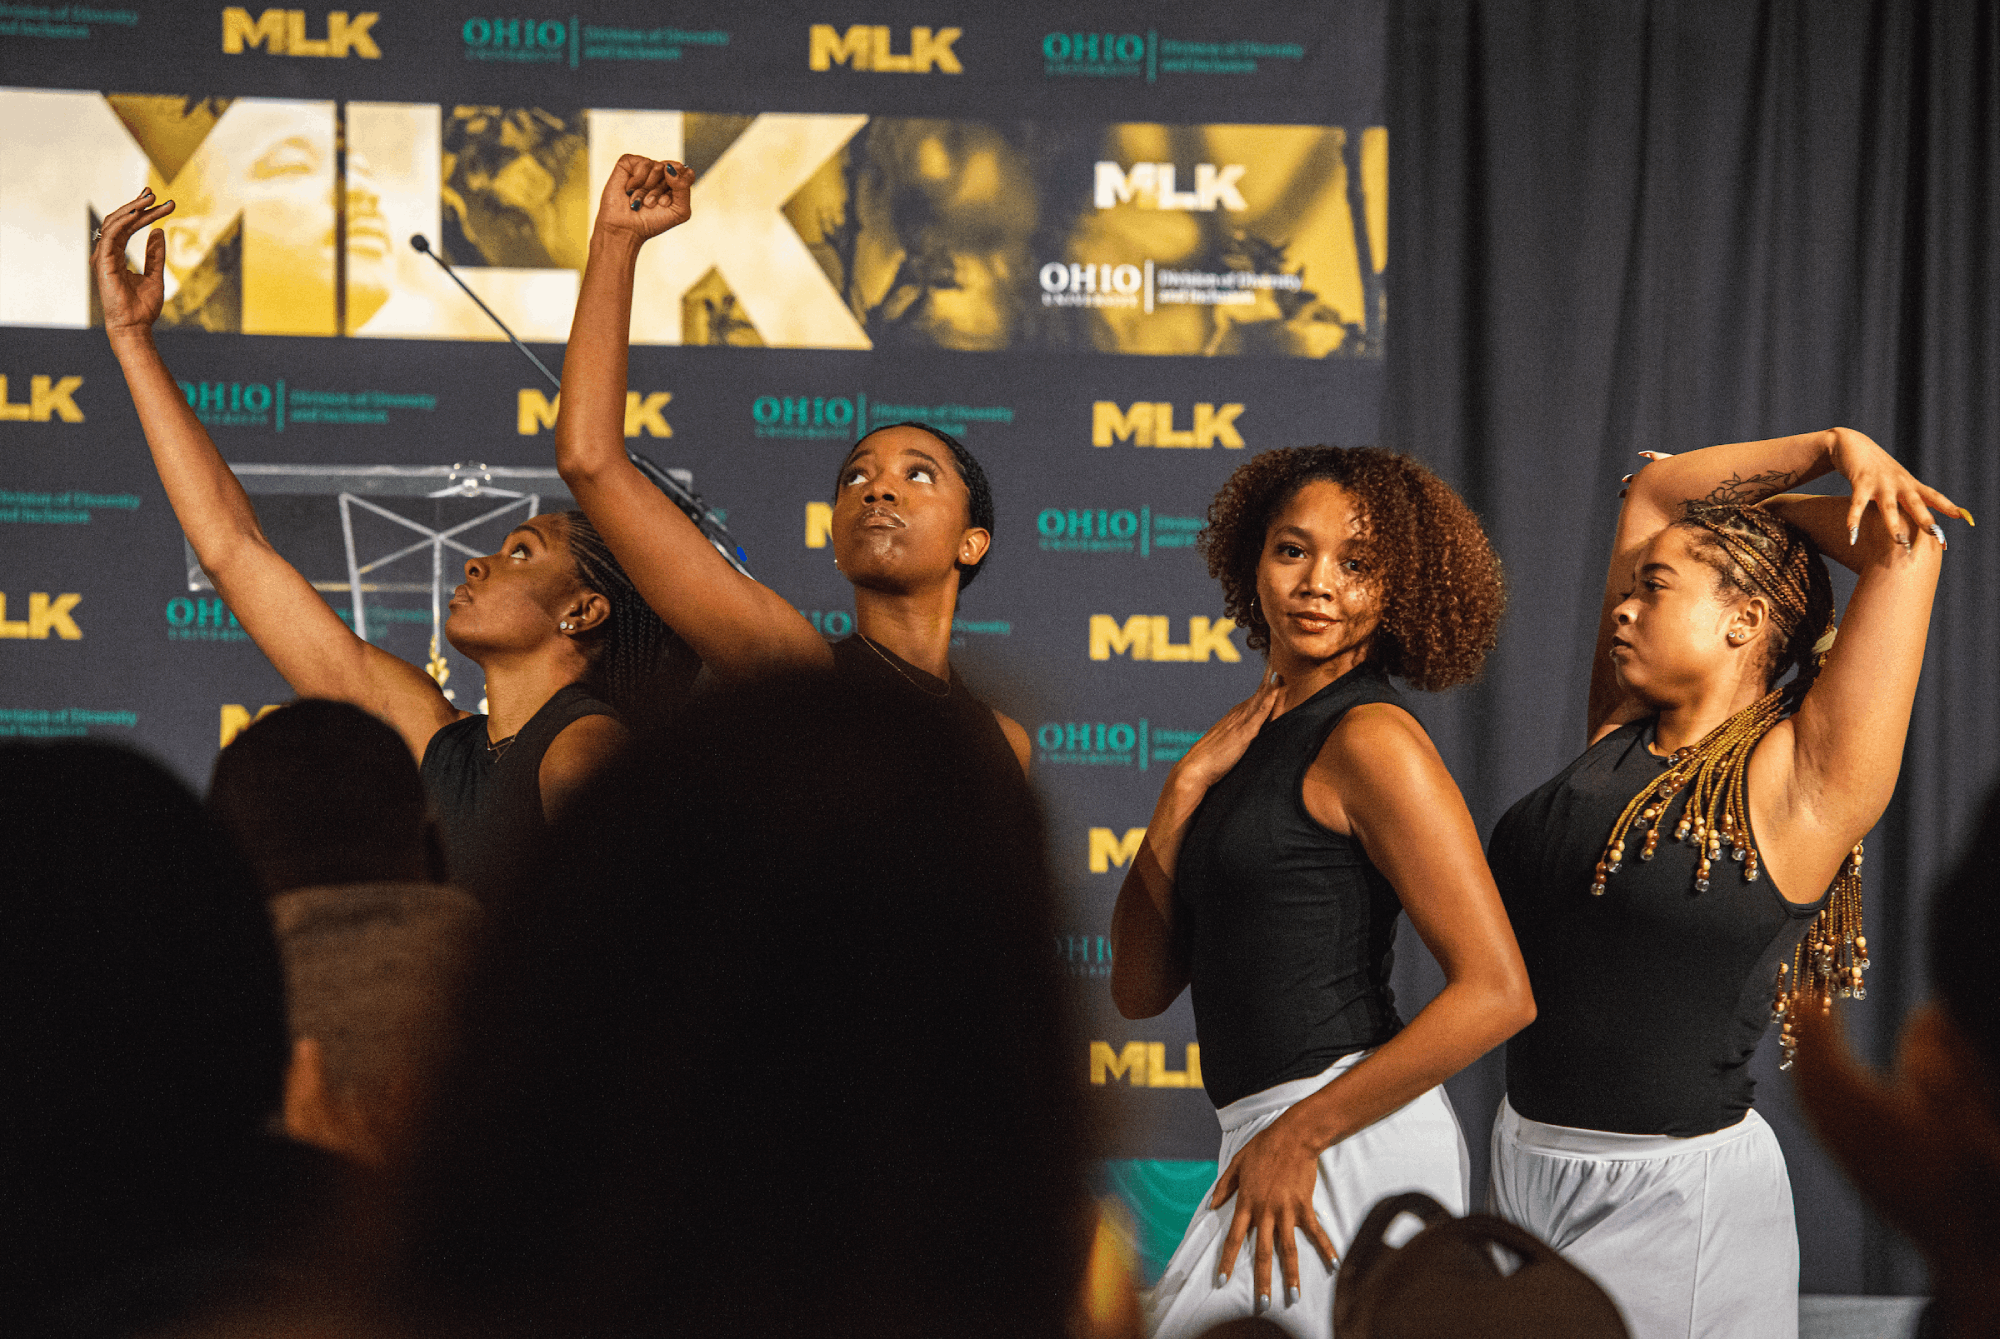 The Athens Black Contemporary Dancers, which includes Ania Fuller, Makayla Moore, Najah Carson, and Alexis Fuqua, are shown performing  at the Martin Luther King Jr. Celebration brunch at Baker Center.